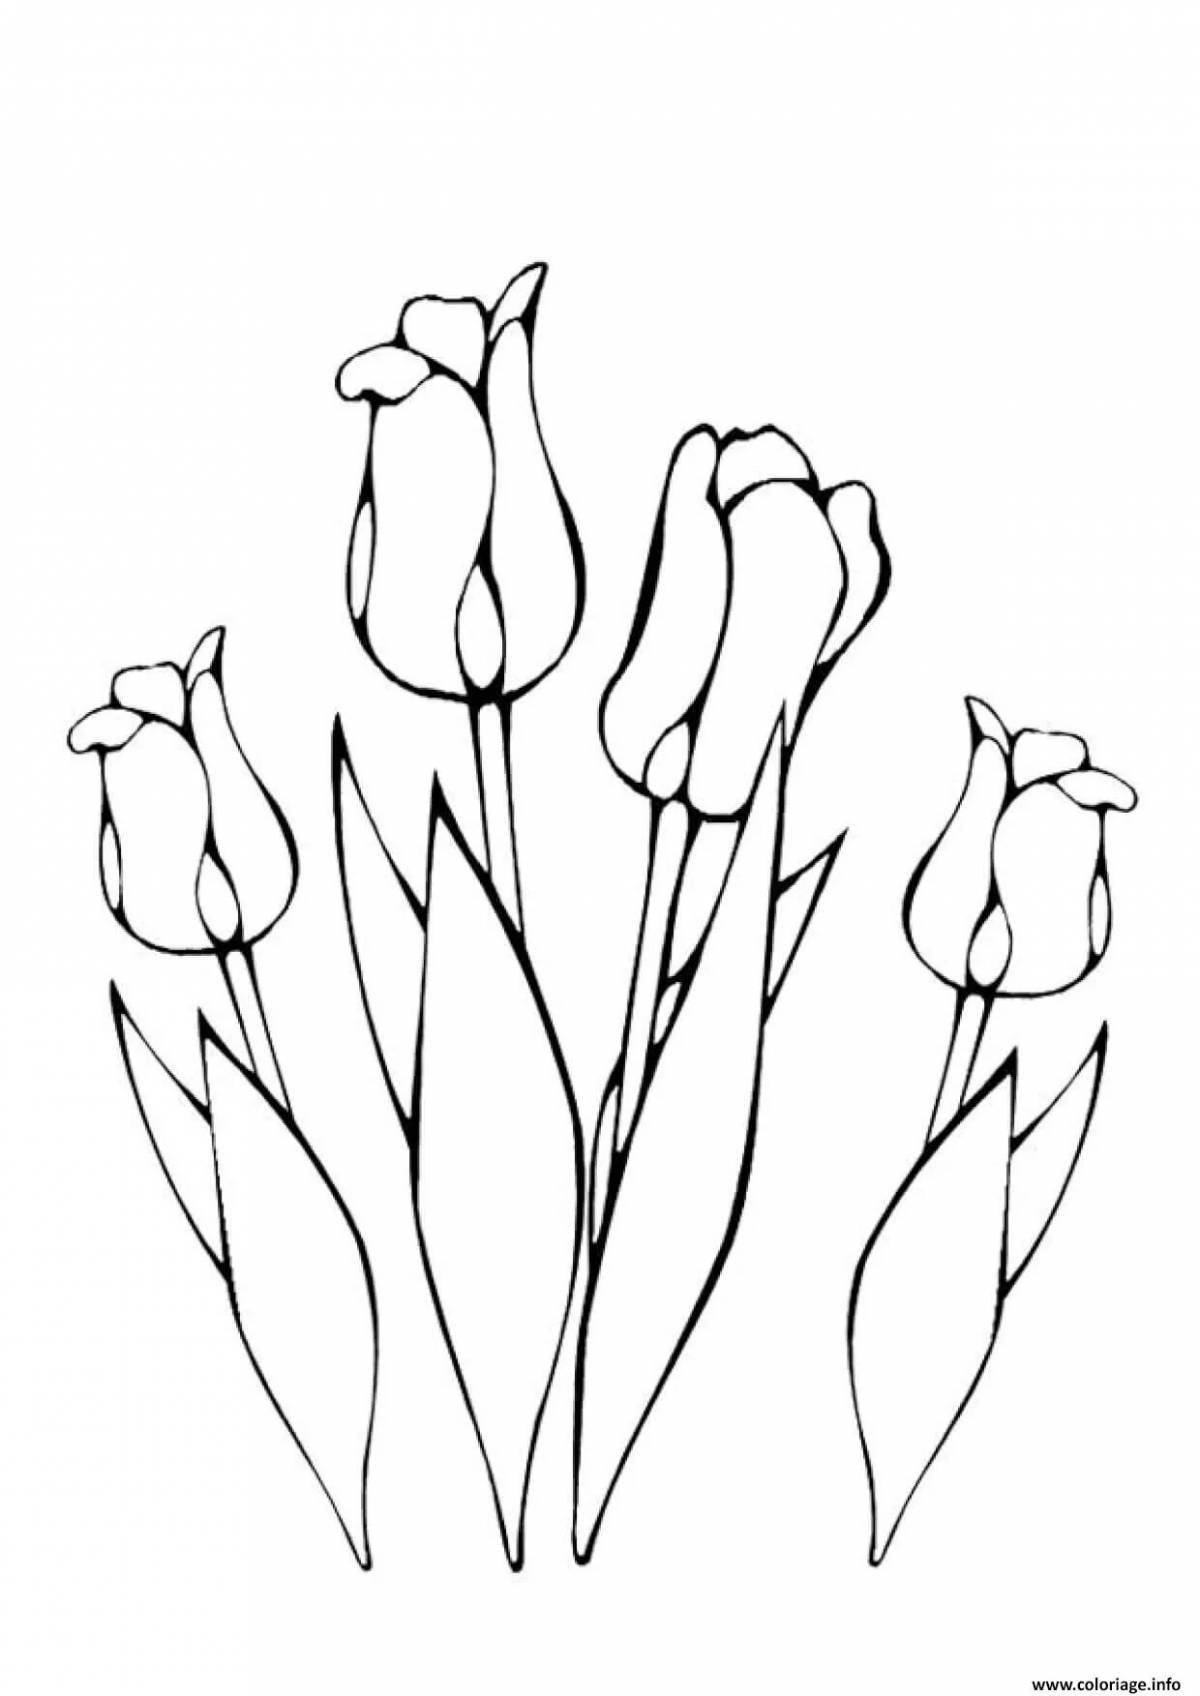 Coloring page playful spring tulips